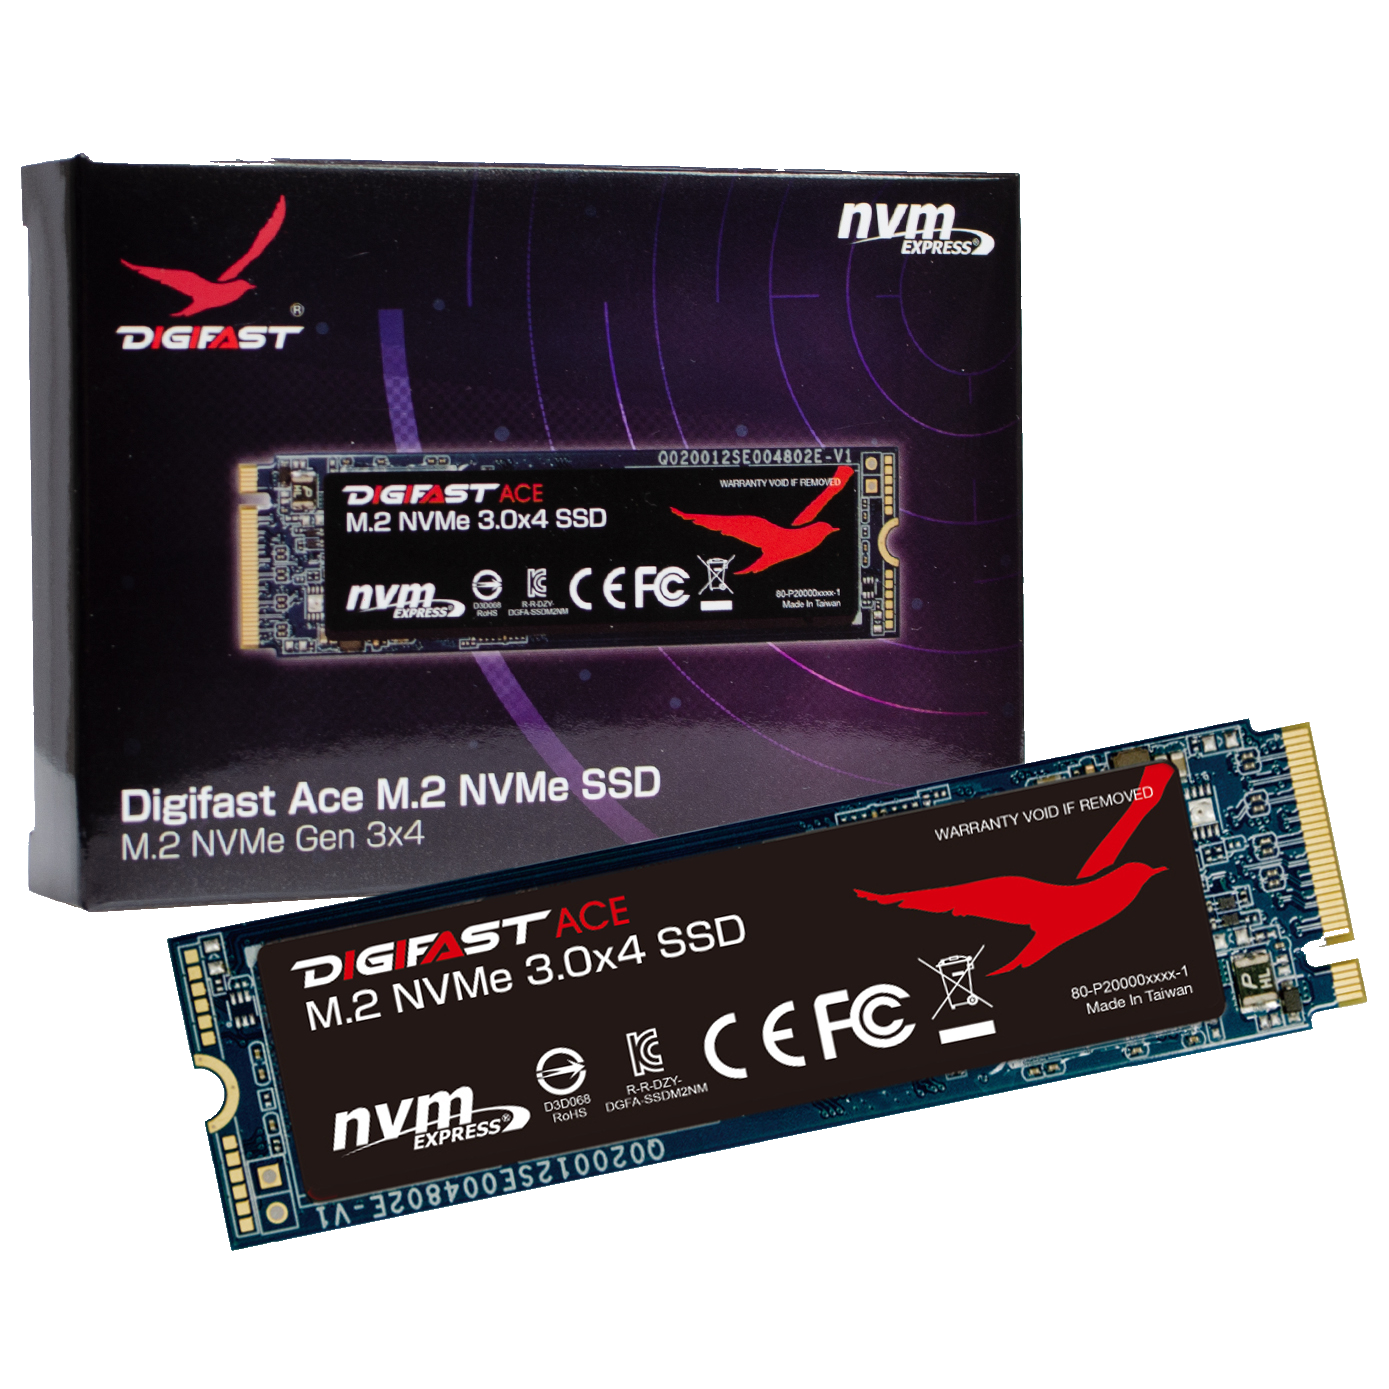 Digifast Ace NVMe M.2 product with packaging